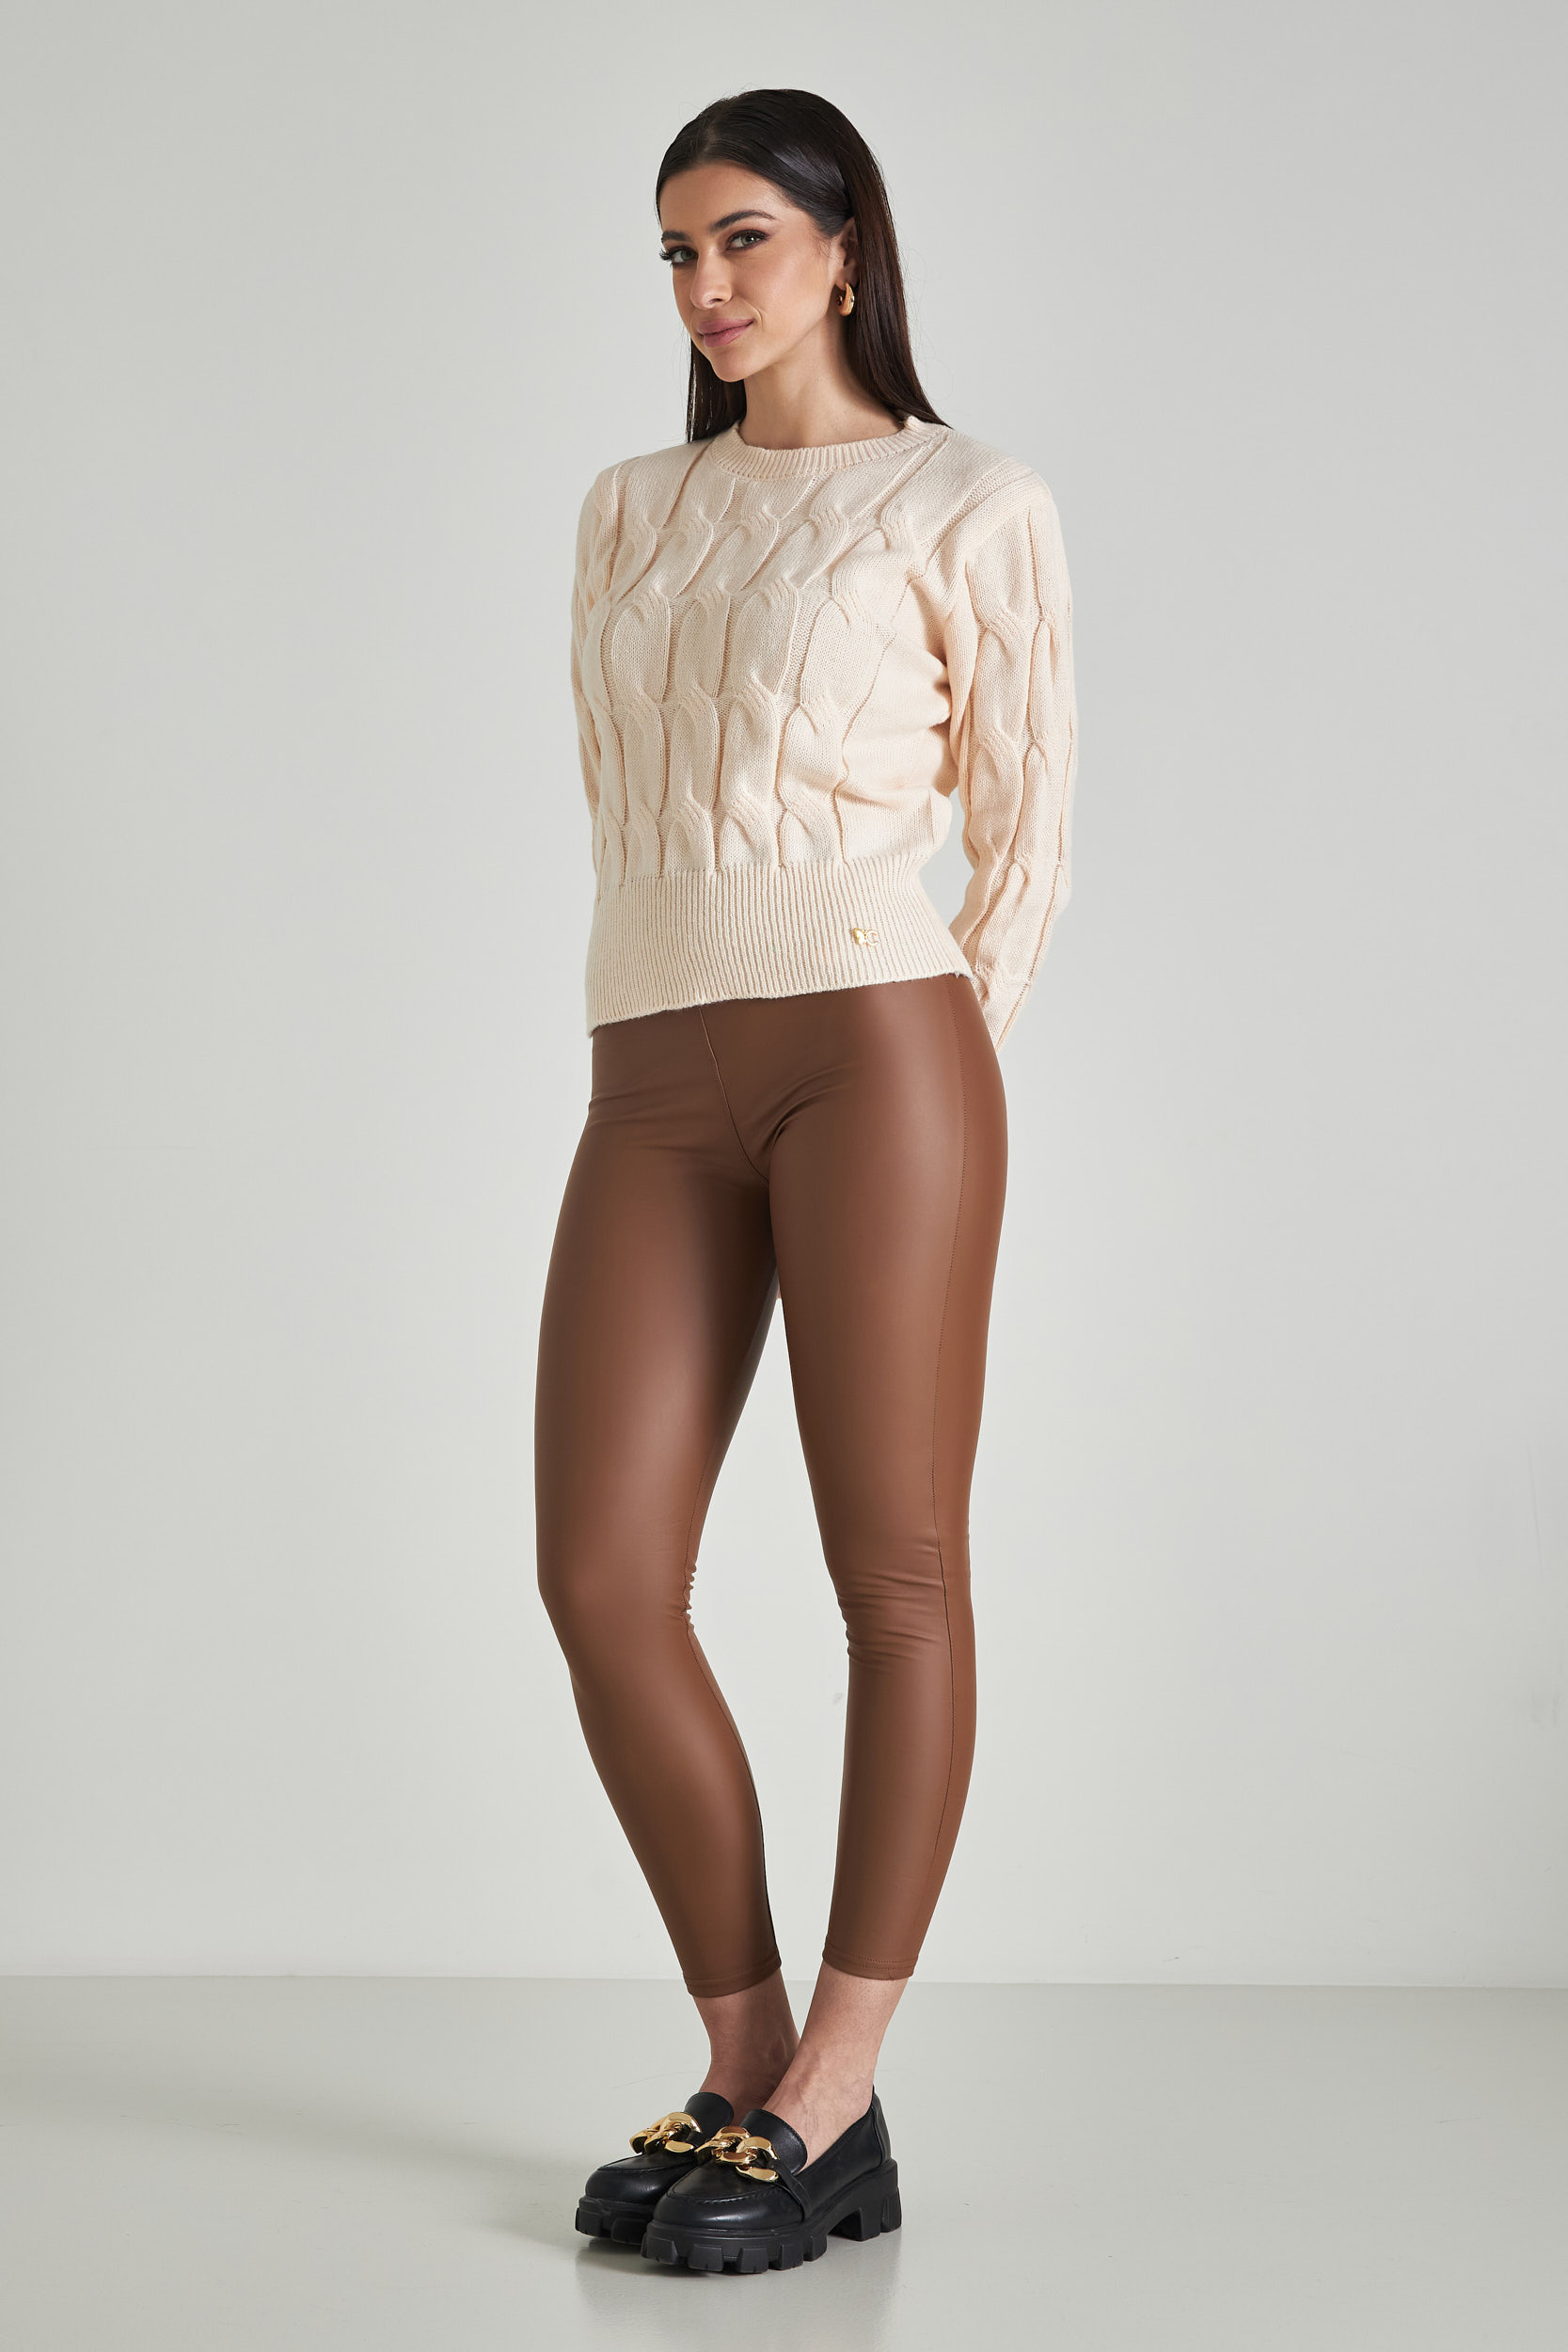 Picture of Faux leather highwaisted leggings